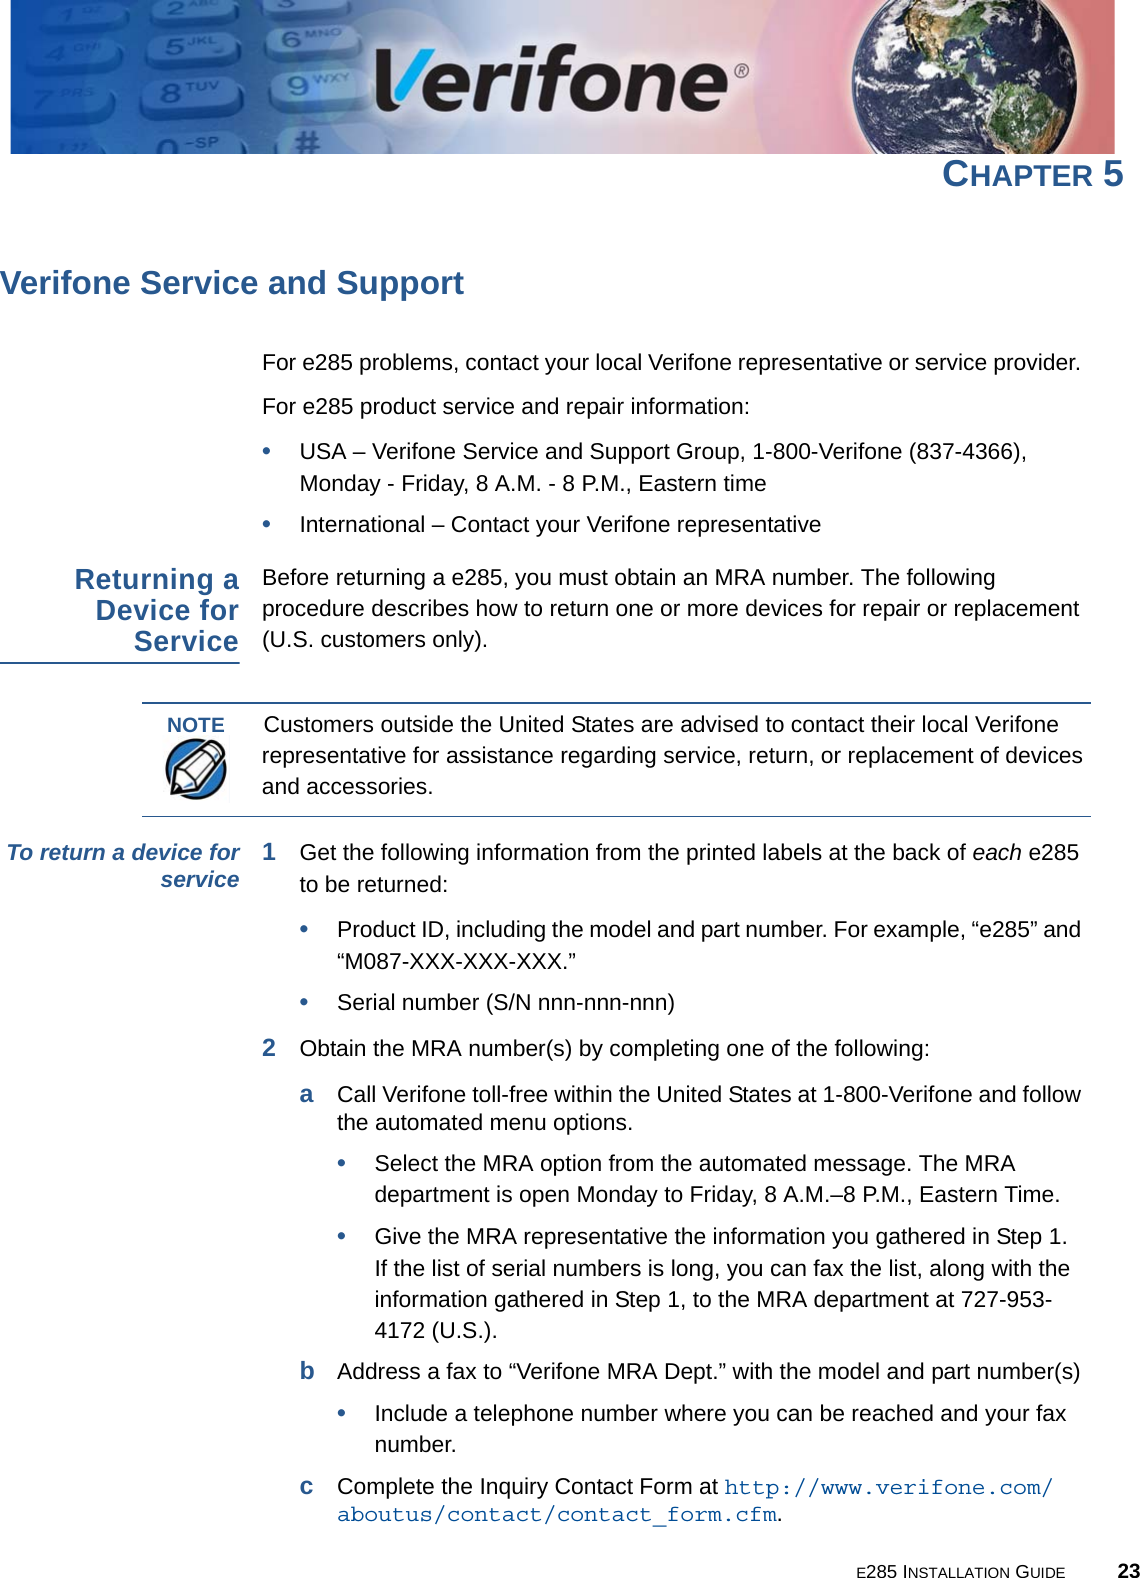 E285 INSTALLATION GUIDE 23CHAPTER 5Verifone Service and SupportFor e285 problems, contact your local Verifone representative or service provider. For e285 product service and repair information:•USA – Verifone Service and Support Group, 1-800-Verifone (837-4366),  Monday - Friday, 8 A.M. - 8 P.M., Eastern time•International – Contact your Verifone representative Returning a Device for ServiceBefore returning a e285, you must obtain an MRA number. The following procedure describes how to return one or more devices for repair or replacement (U.S. customers only). To return a device for service 1Get the following information from the printed labels at the back of each e285 to be returned:•Product ID, including the model and part number. For example, “e285” and “M087-XXX-XXX-XXX.”•Serial number (S/N nnn-nnn-nnn)2Obtain the MRA number(s) by completing one of the following:aCall Verifone toll-free within the United States at 1-800-Verifone and follow the automated menu options.•Select the MRA option from the automated message. The MRA department is open Monday to Friday, 8 A.M.–8 P.M., Eastern Time.•Give the MRA representative the information you gathered in Step 1. If the list of serial numbers is long, you can fax the list, along with the information gathered in Step 1, to the MRA department at 727-953-4172 (U.S.).bAddress a fax to “Verifone MRA Dept.” with the model and part number(s)•Include a telephone number where you can be reached and your fax number.cComplete the Inquiry Contact Form at http://www.verifone.com/aboutus/contact/contact_form.cfm.NOTECustomers outside the United States are advised to contact their local Verifone representative for assistance regarding service, return, or replacement of devices and accessories.